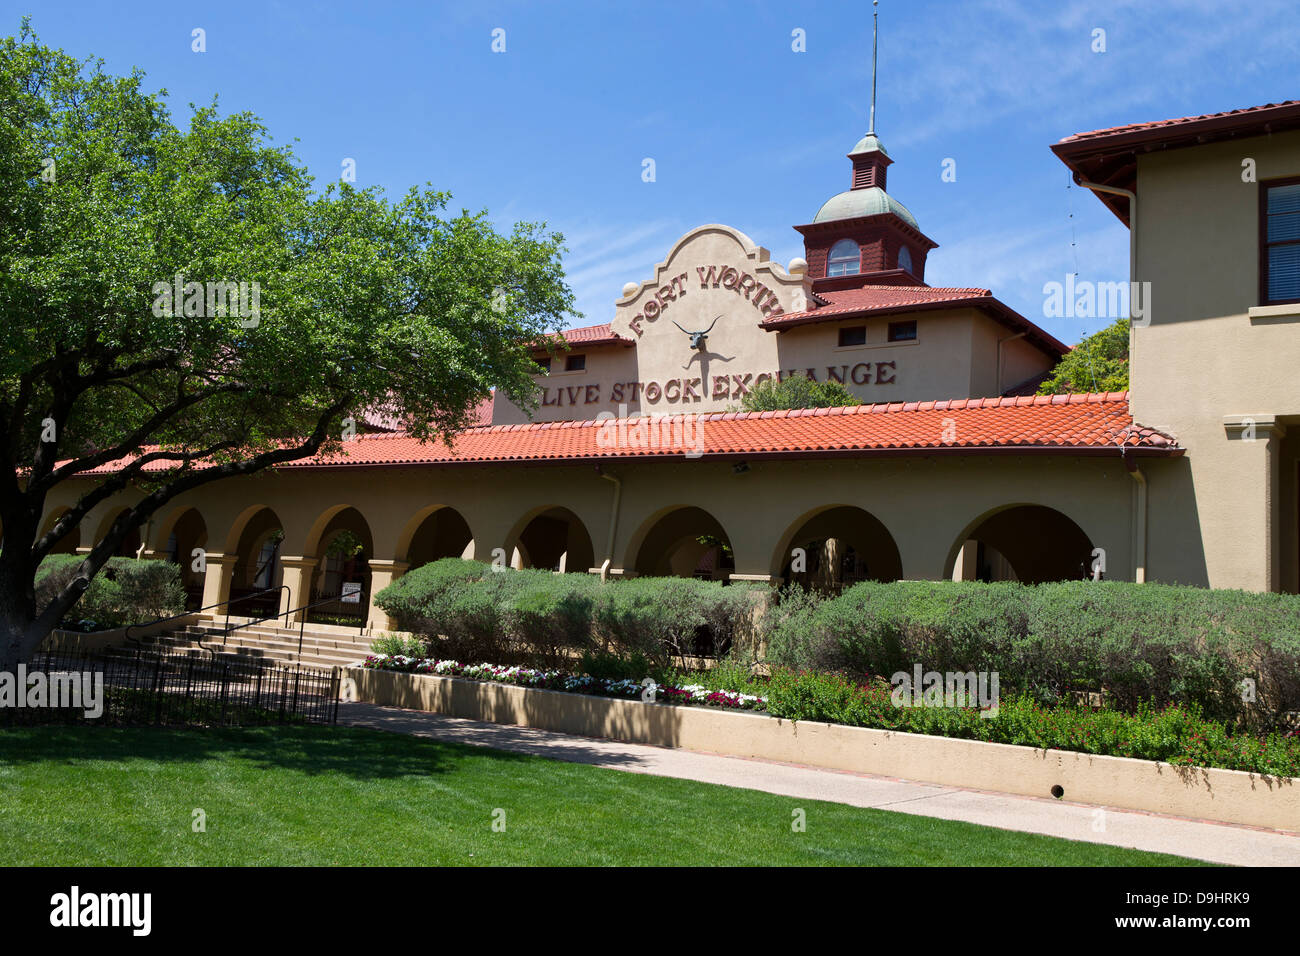 Fort worth stockyards station hi-res stock photography and images - Alamy